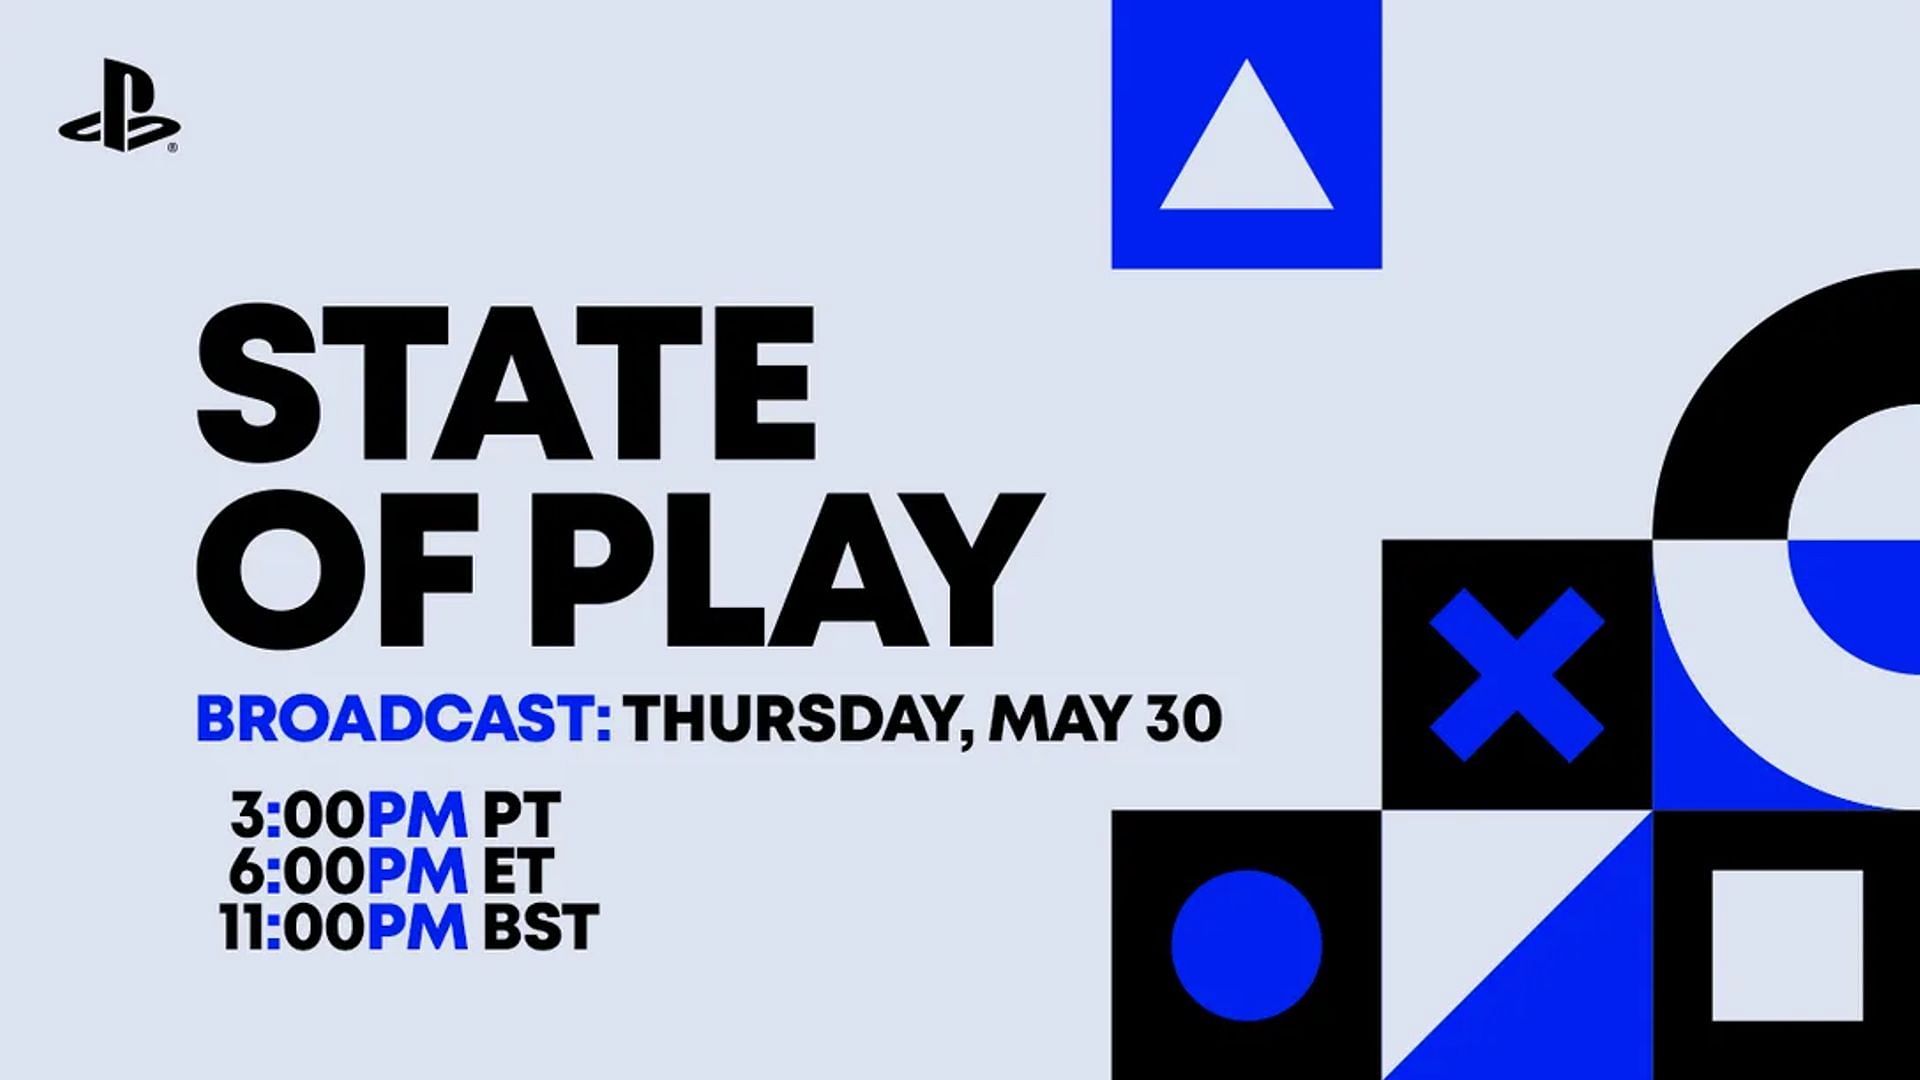 State of Play promotional image